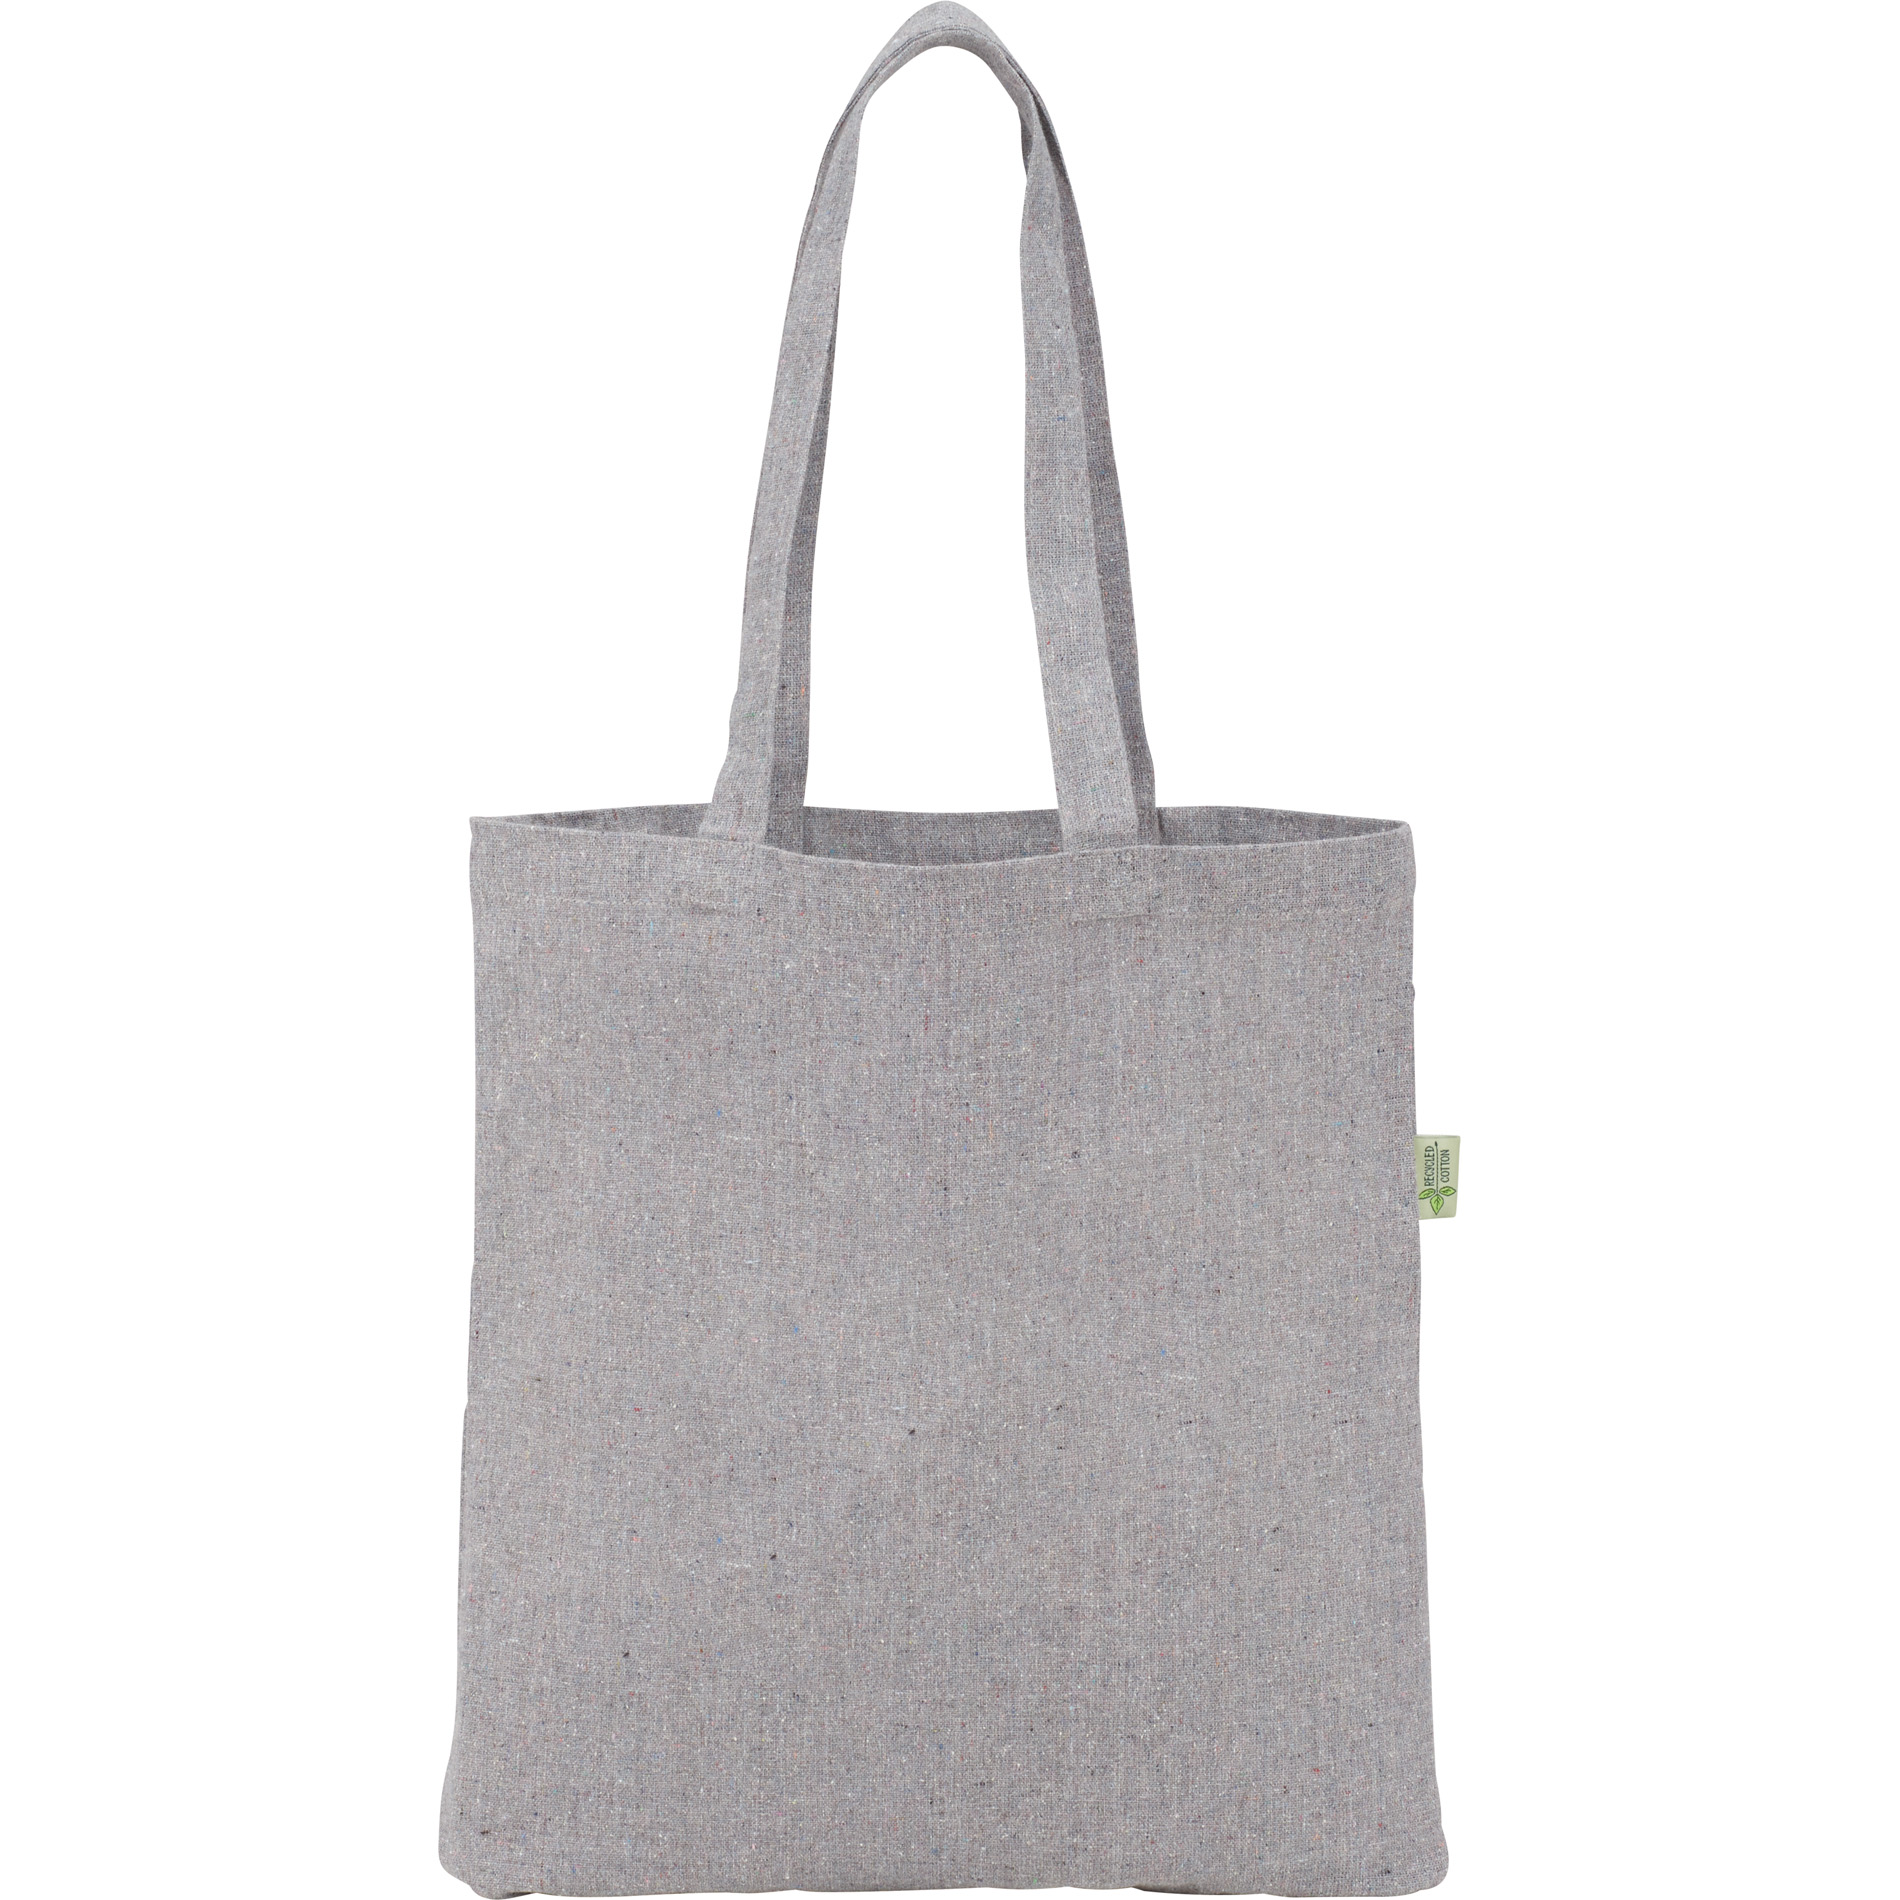 Branded Tote Bags, 7oz Cotton Bag